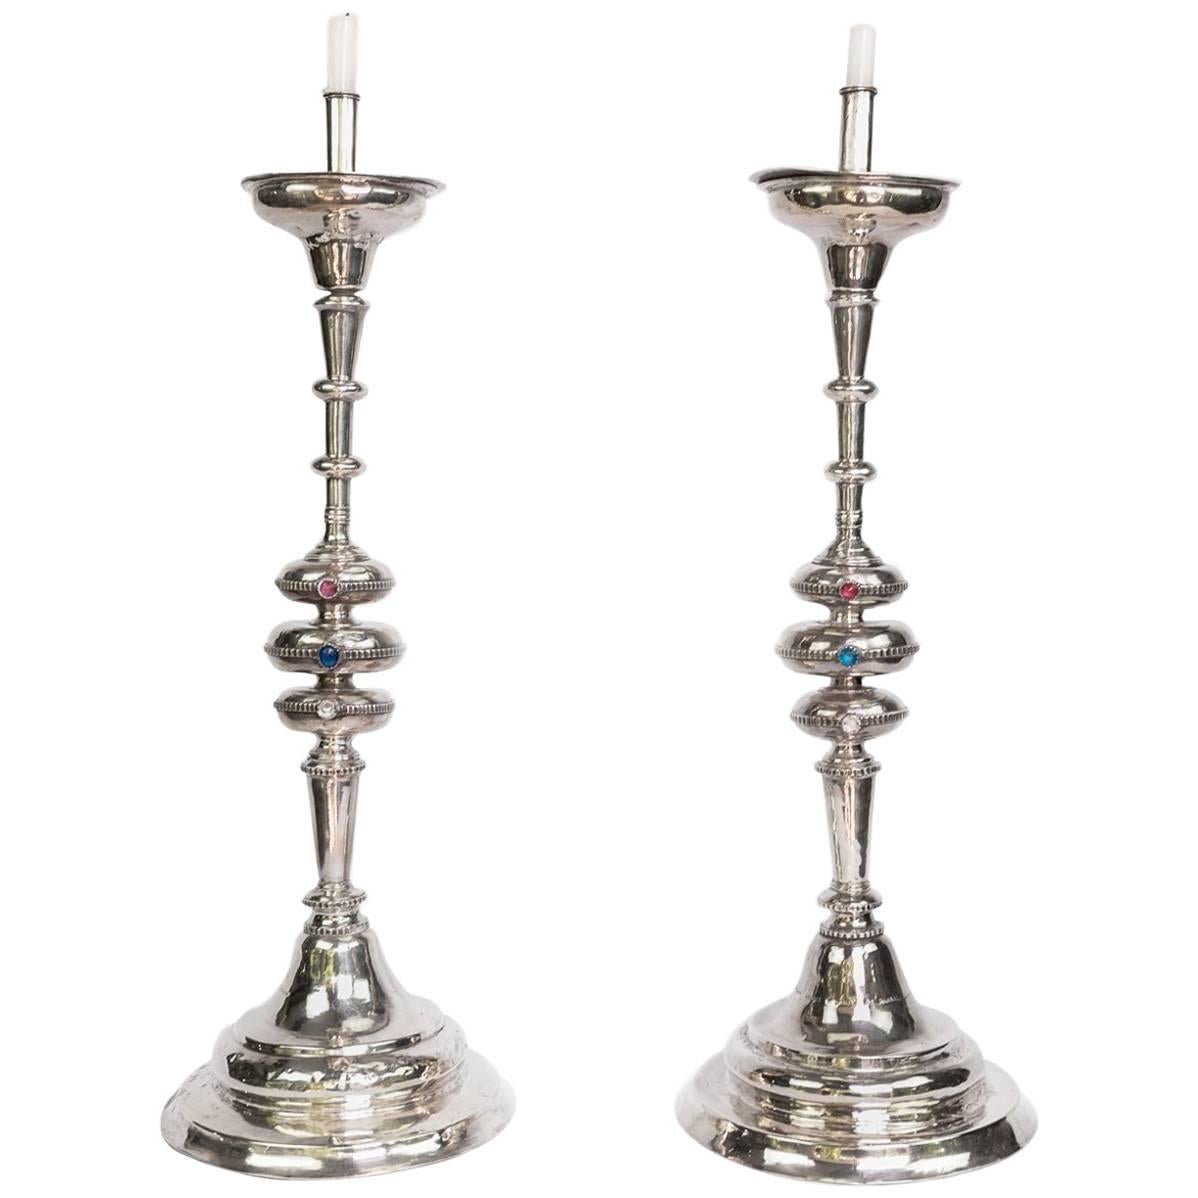 Pair of 18th Century South American Candlesticks with Trade Beads For Sale